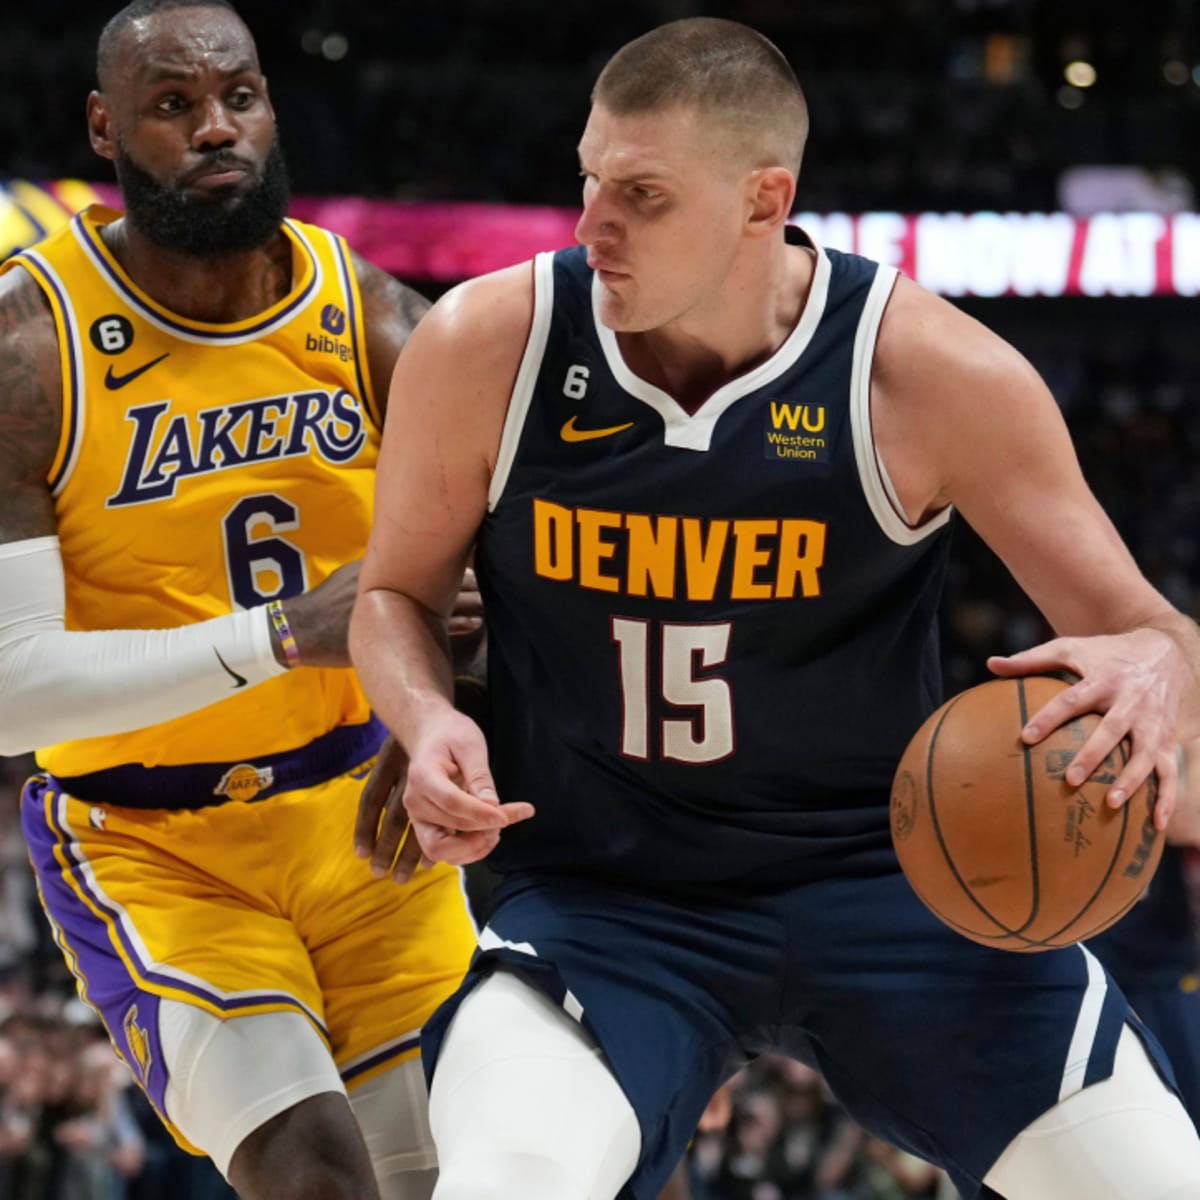 On the Hardwood: Denver Nuggets Repurpose RSN Broadcast With Some